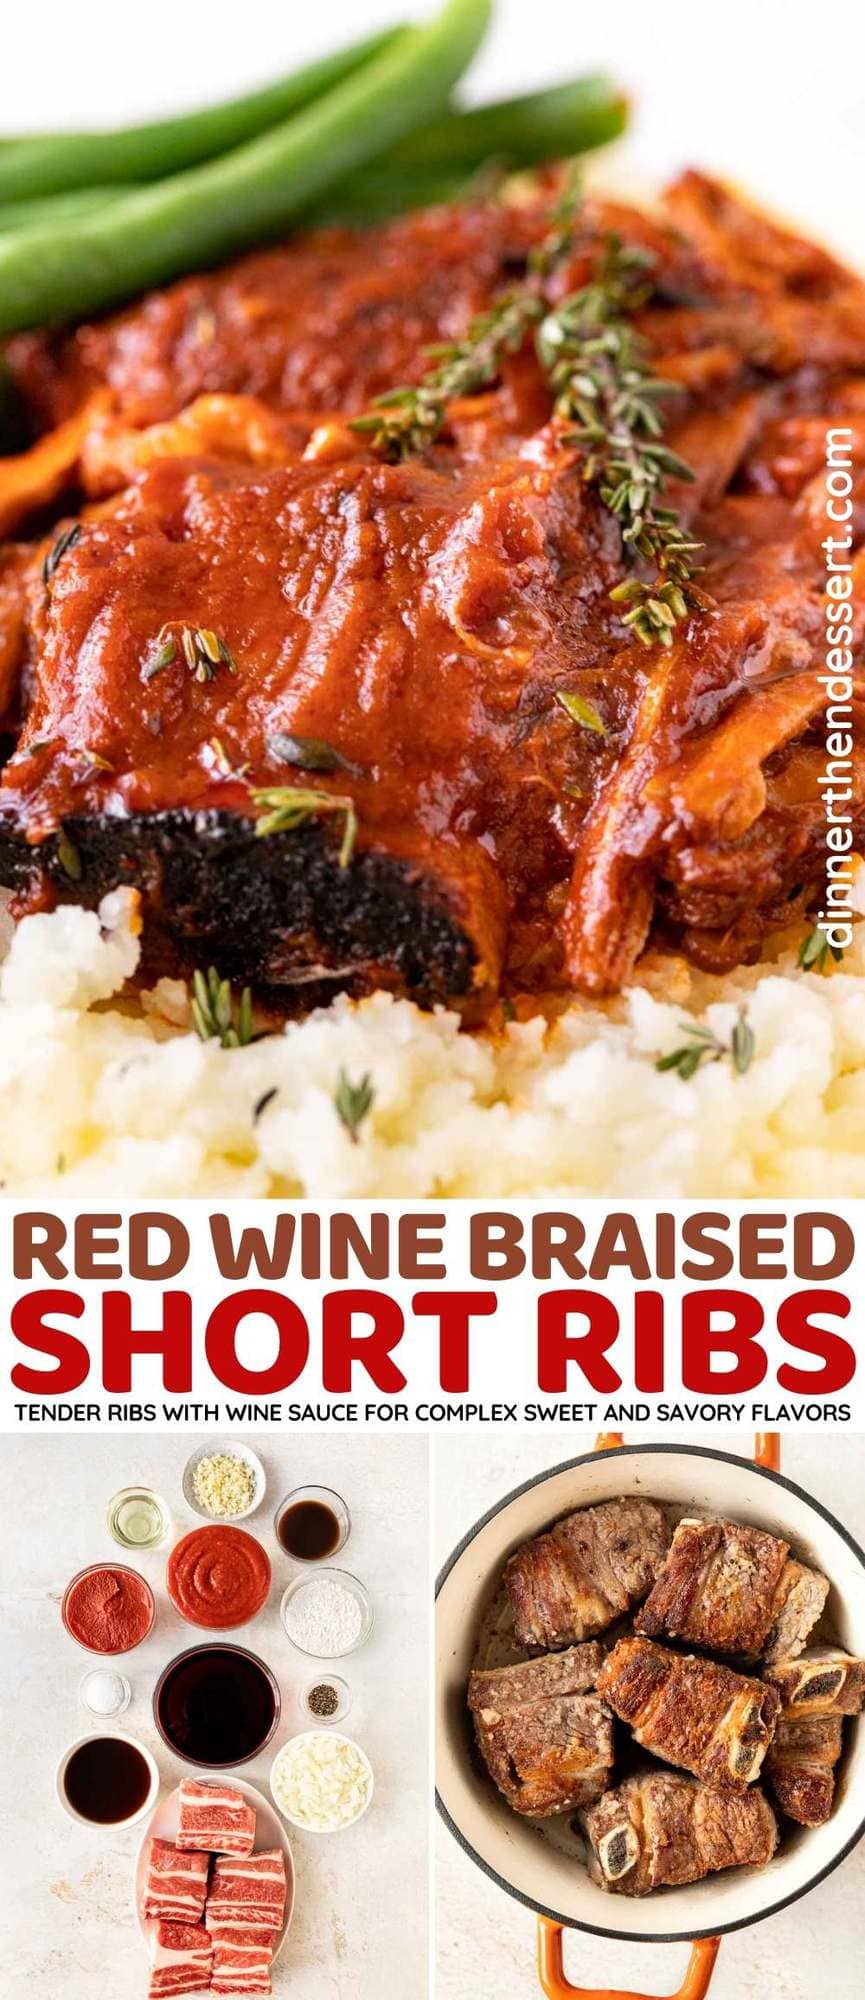 Red Wine Braised Short Ribs collage